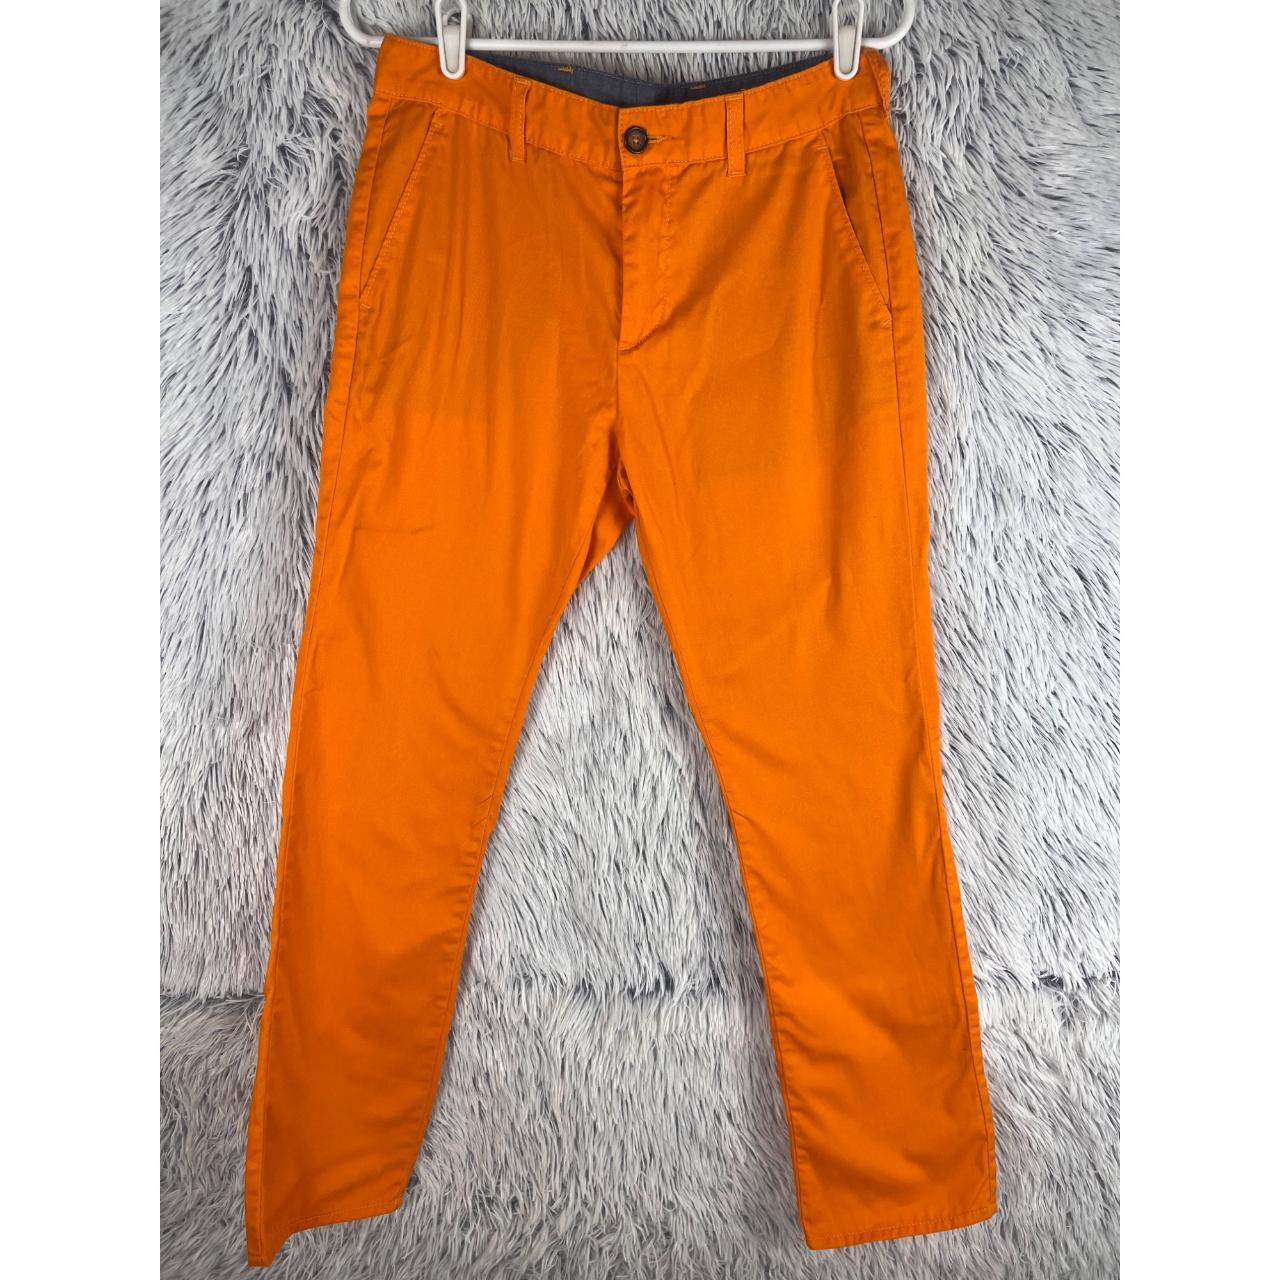 A collection of men's outfits with orange pants that look great in summer!  | Men's Fashion Media OTOKOMAE